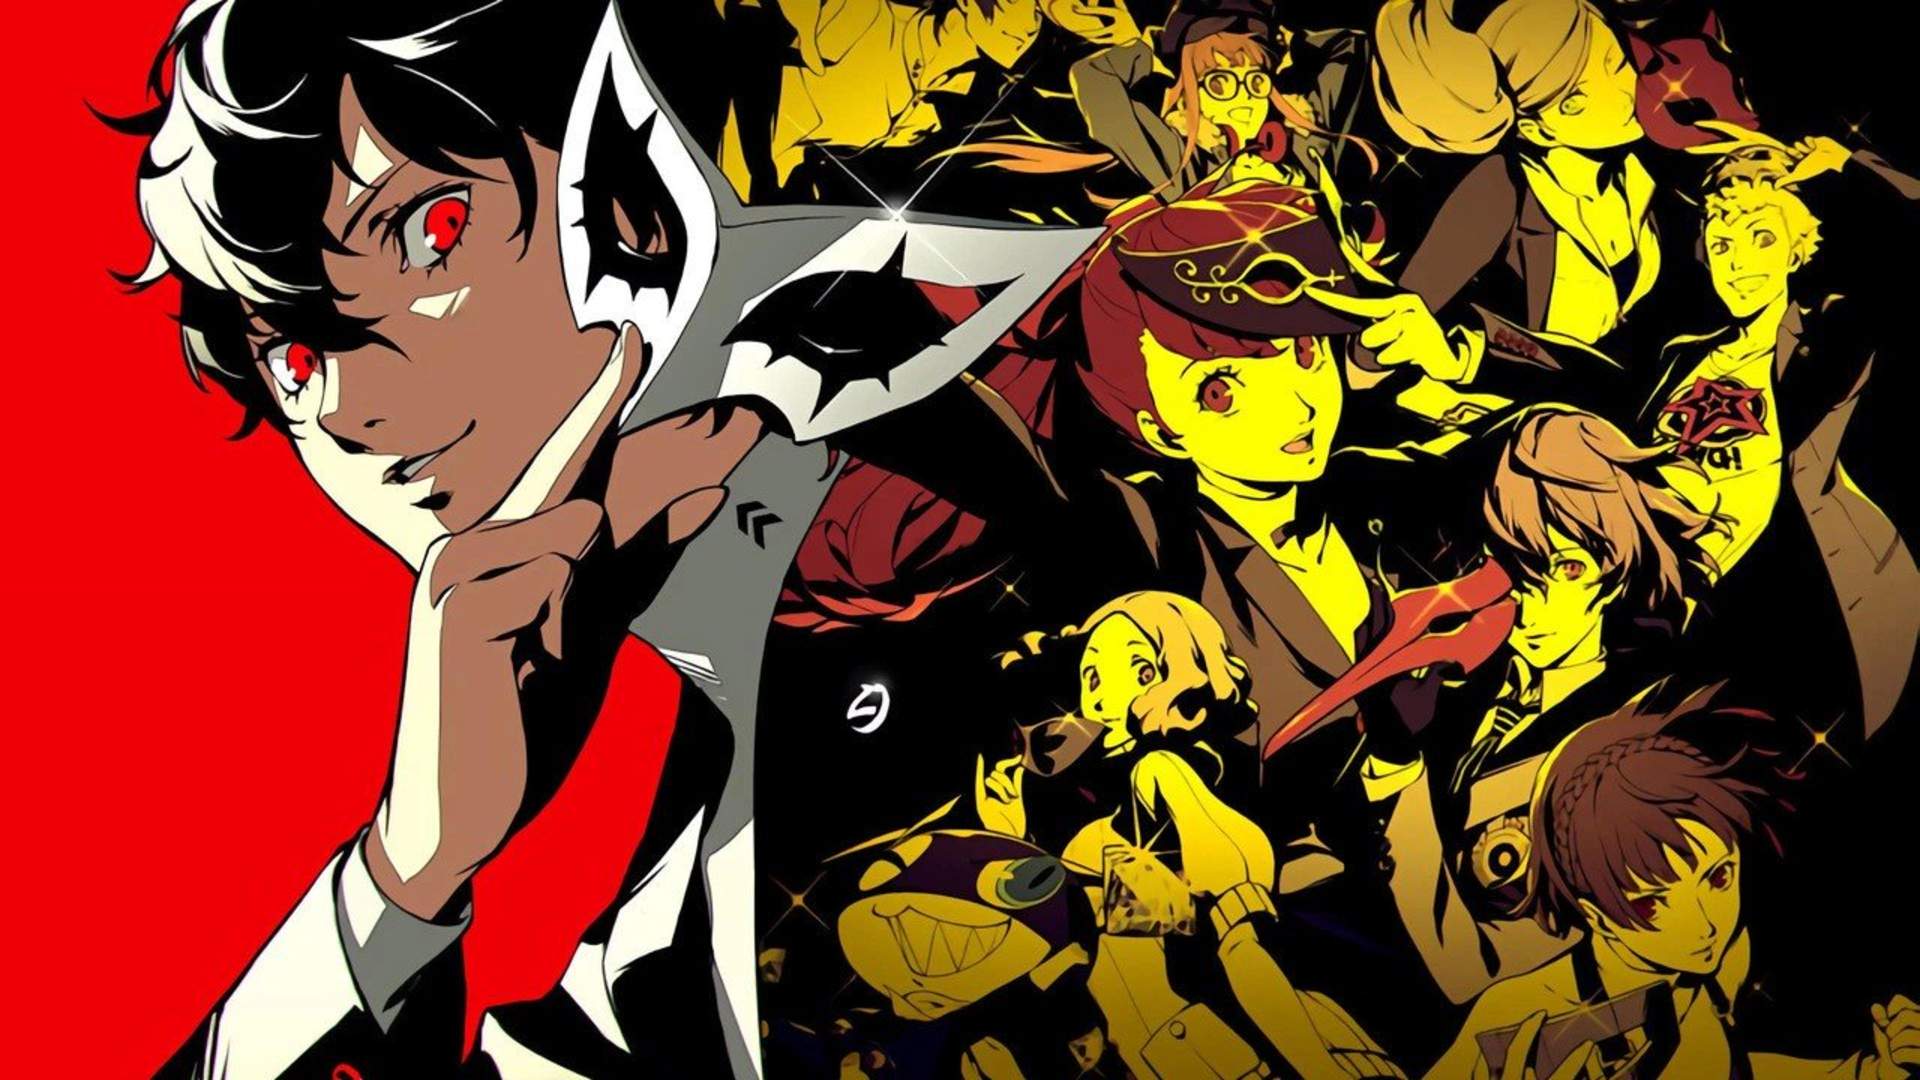 Persona 5' is coming to PC and Xbox Game Pass this year